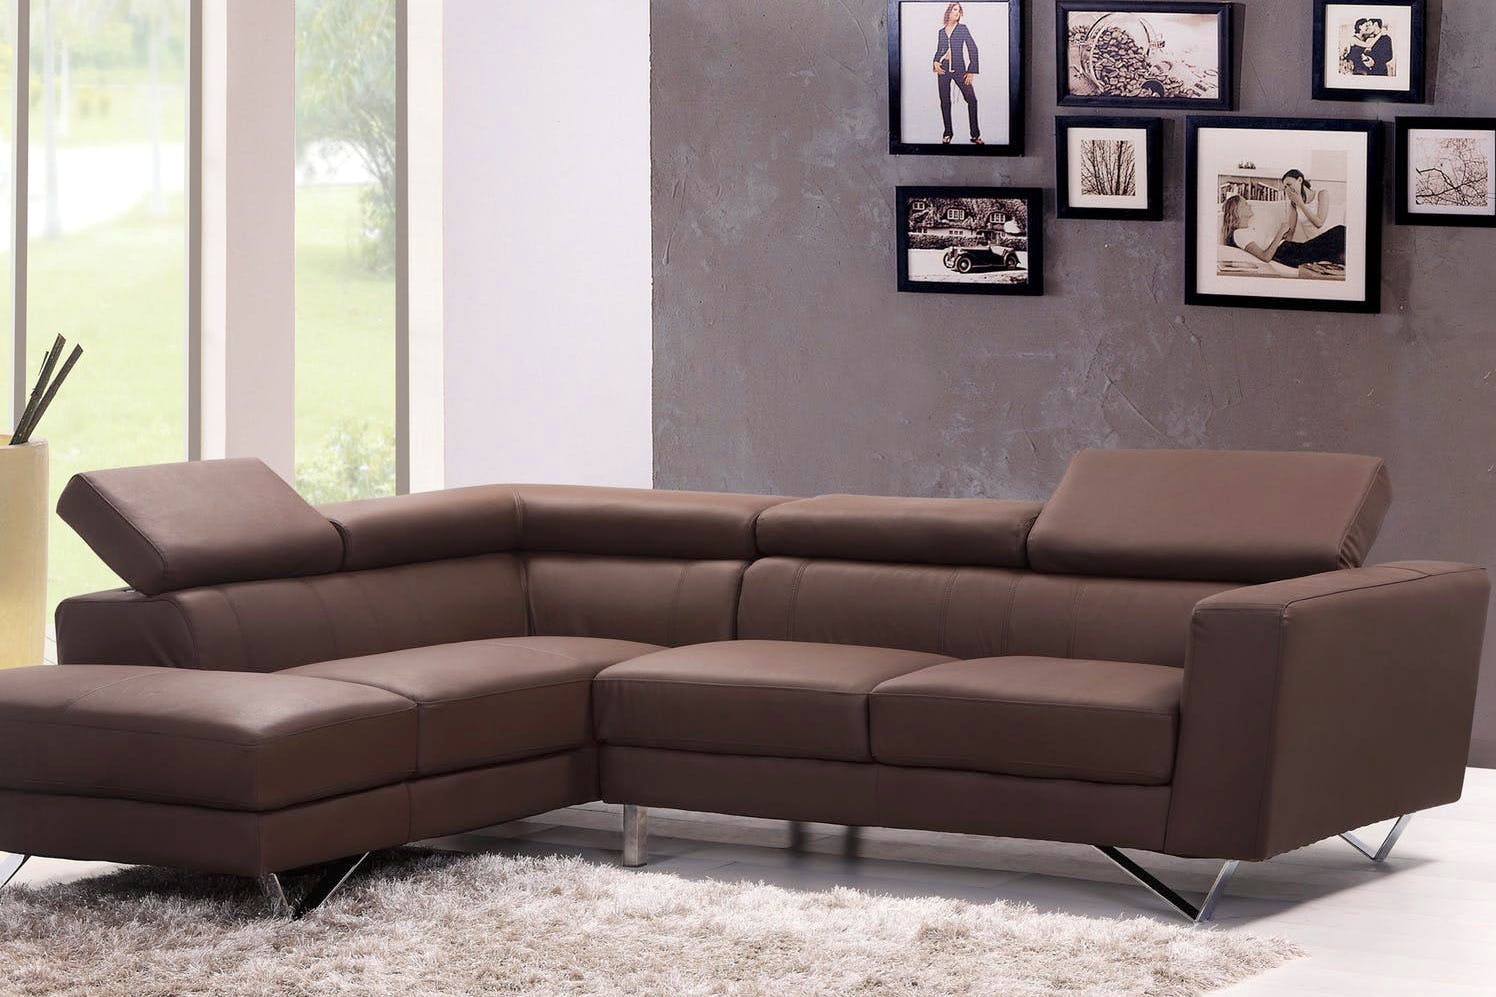 Furniture,Couch,Living room,Room,Sofa bed,Leather,Brown,Chair,Loveseat,Interior design